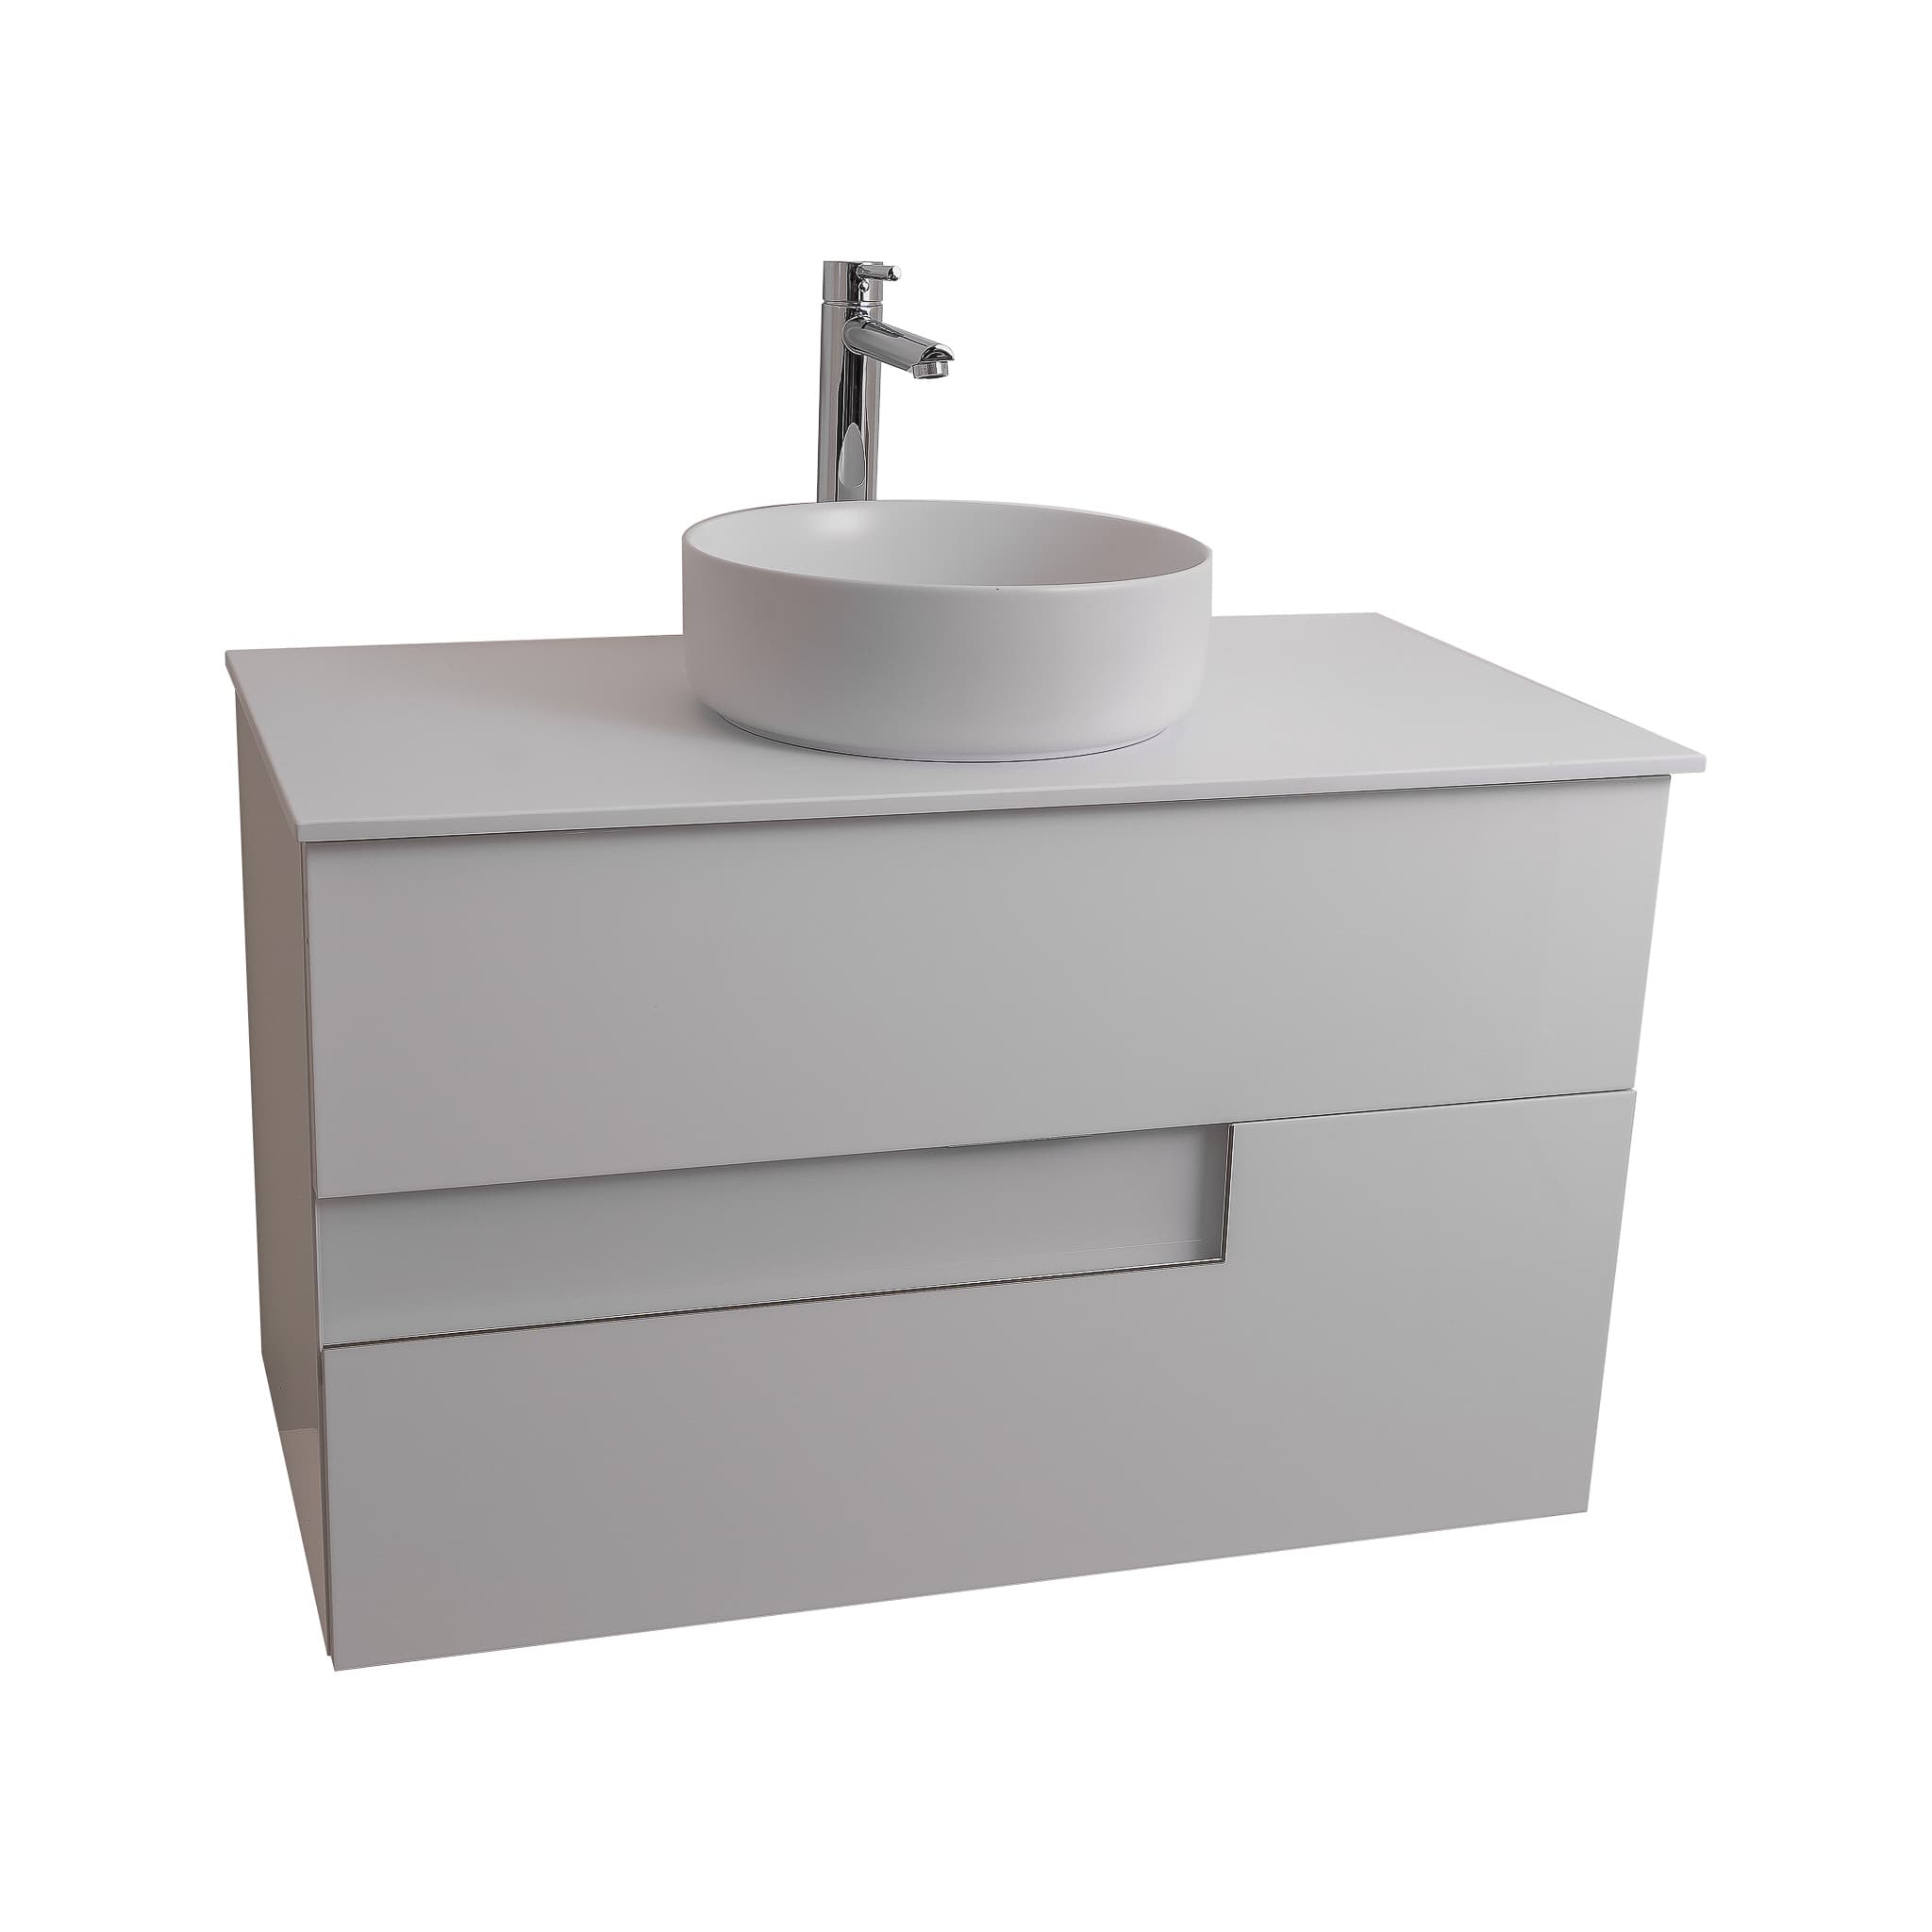 Vision 39.5 White High Gloss Cabinet, Ares White Top And Ares White Ceramic Basin, Wall Mounted Modern Vanity Set